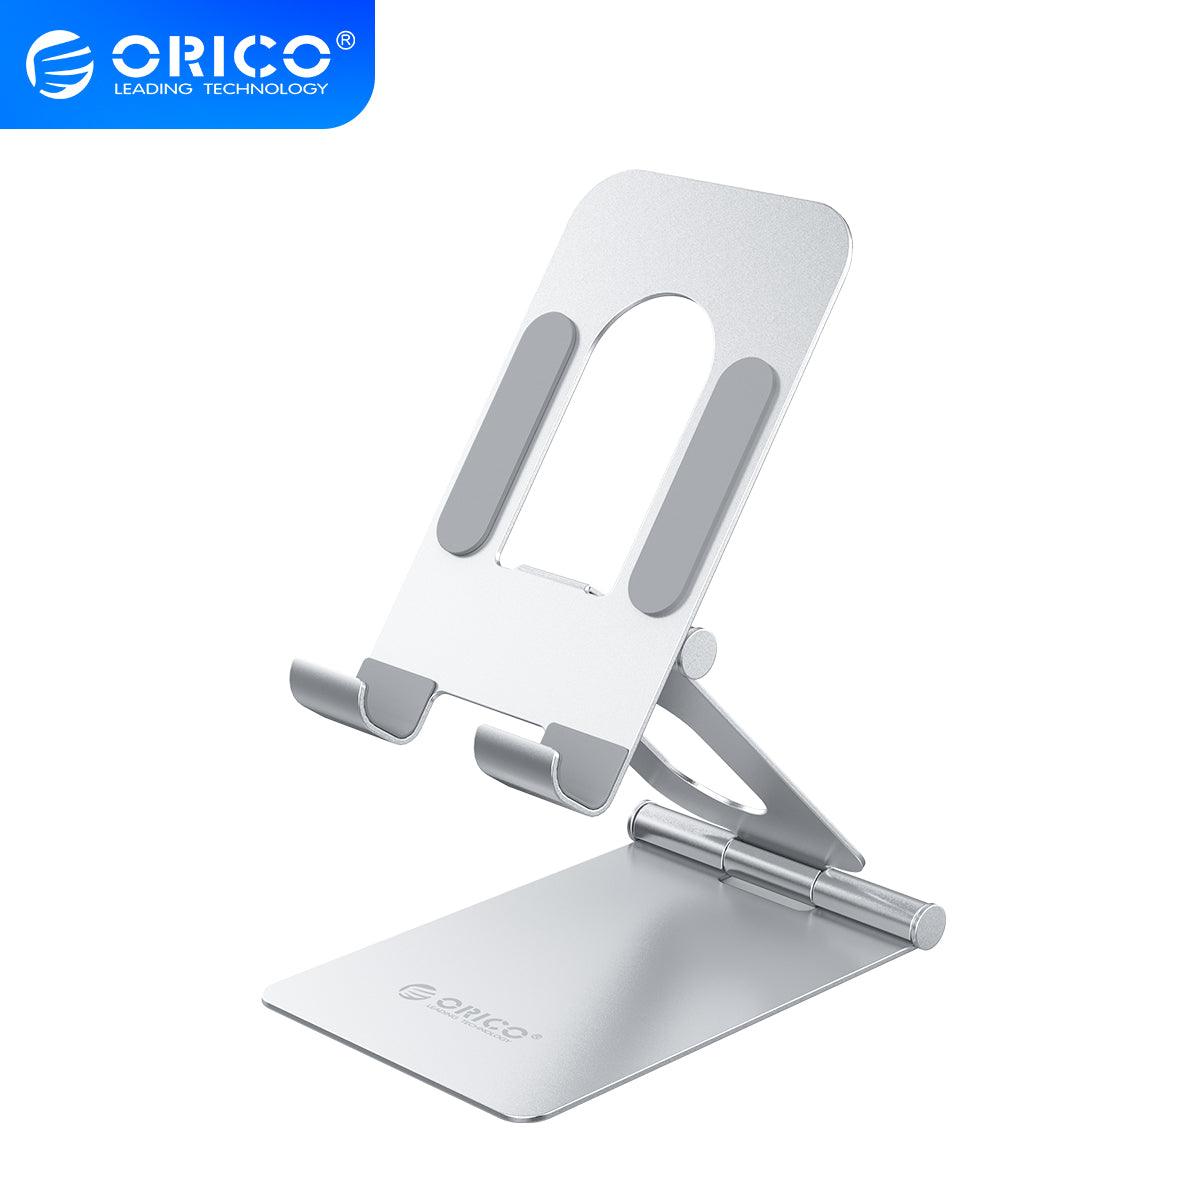 Mobile Phone Stand Foldable Adjustable Stand - eShop Now